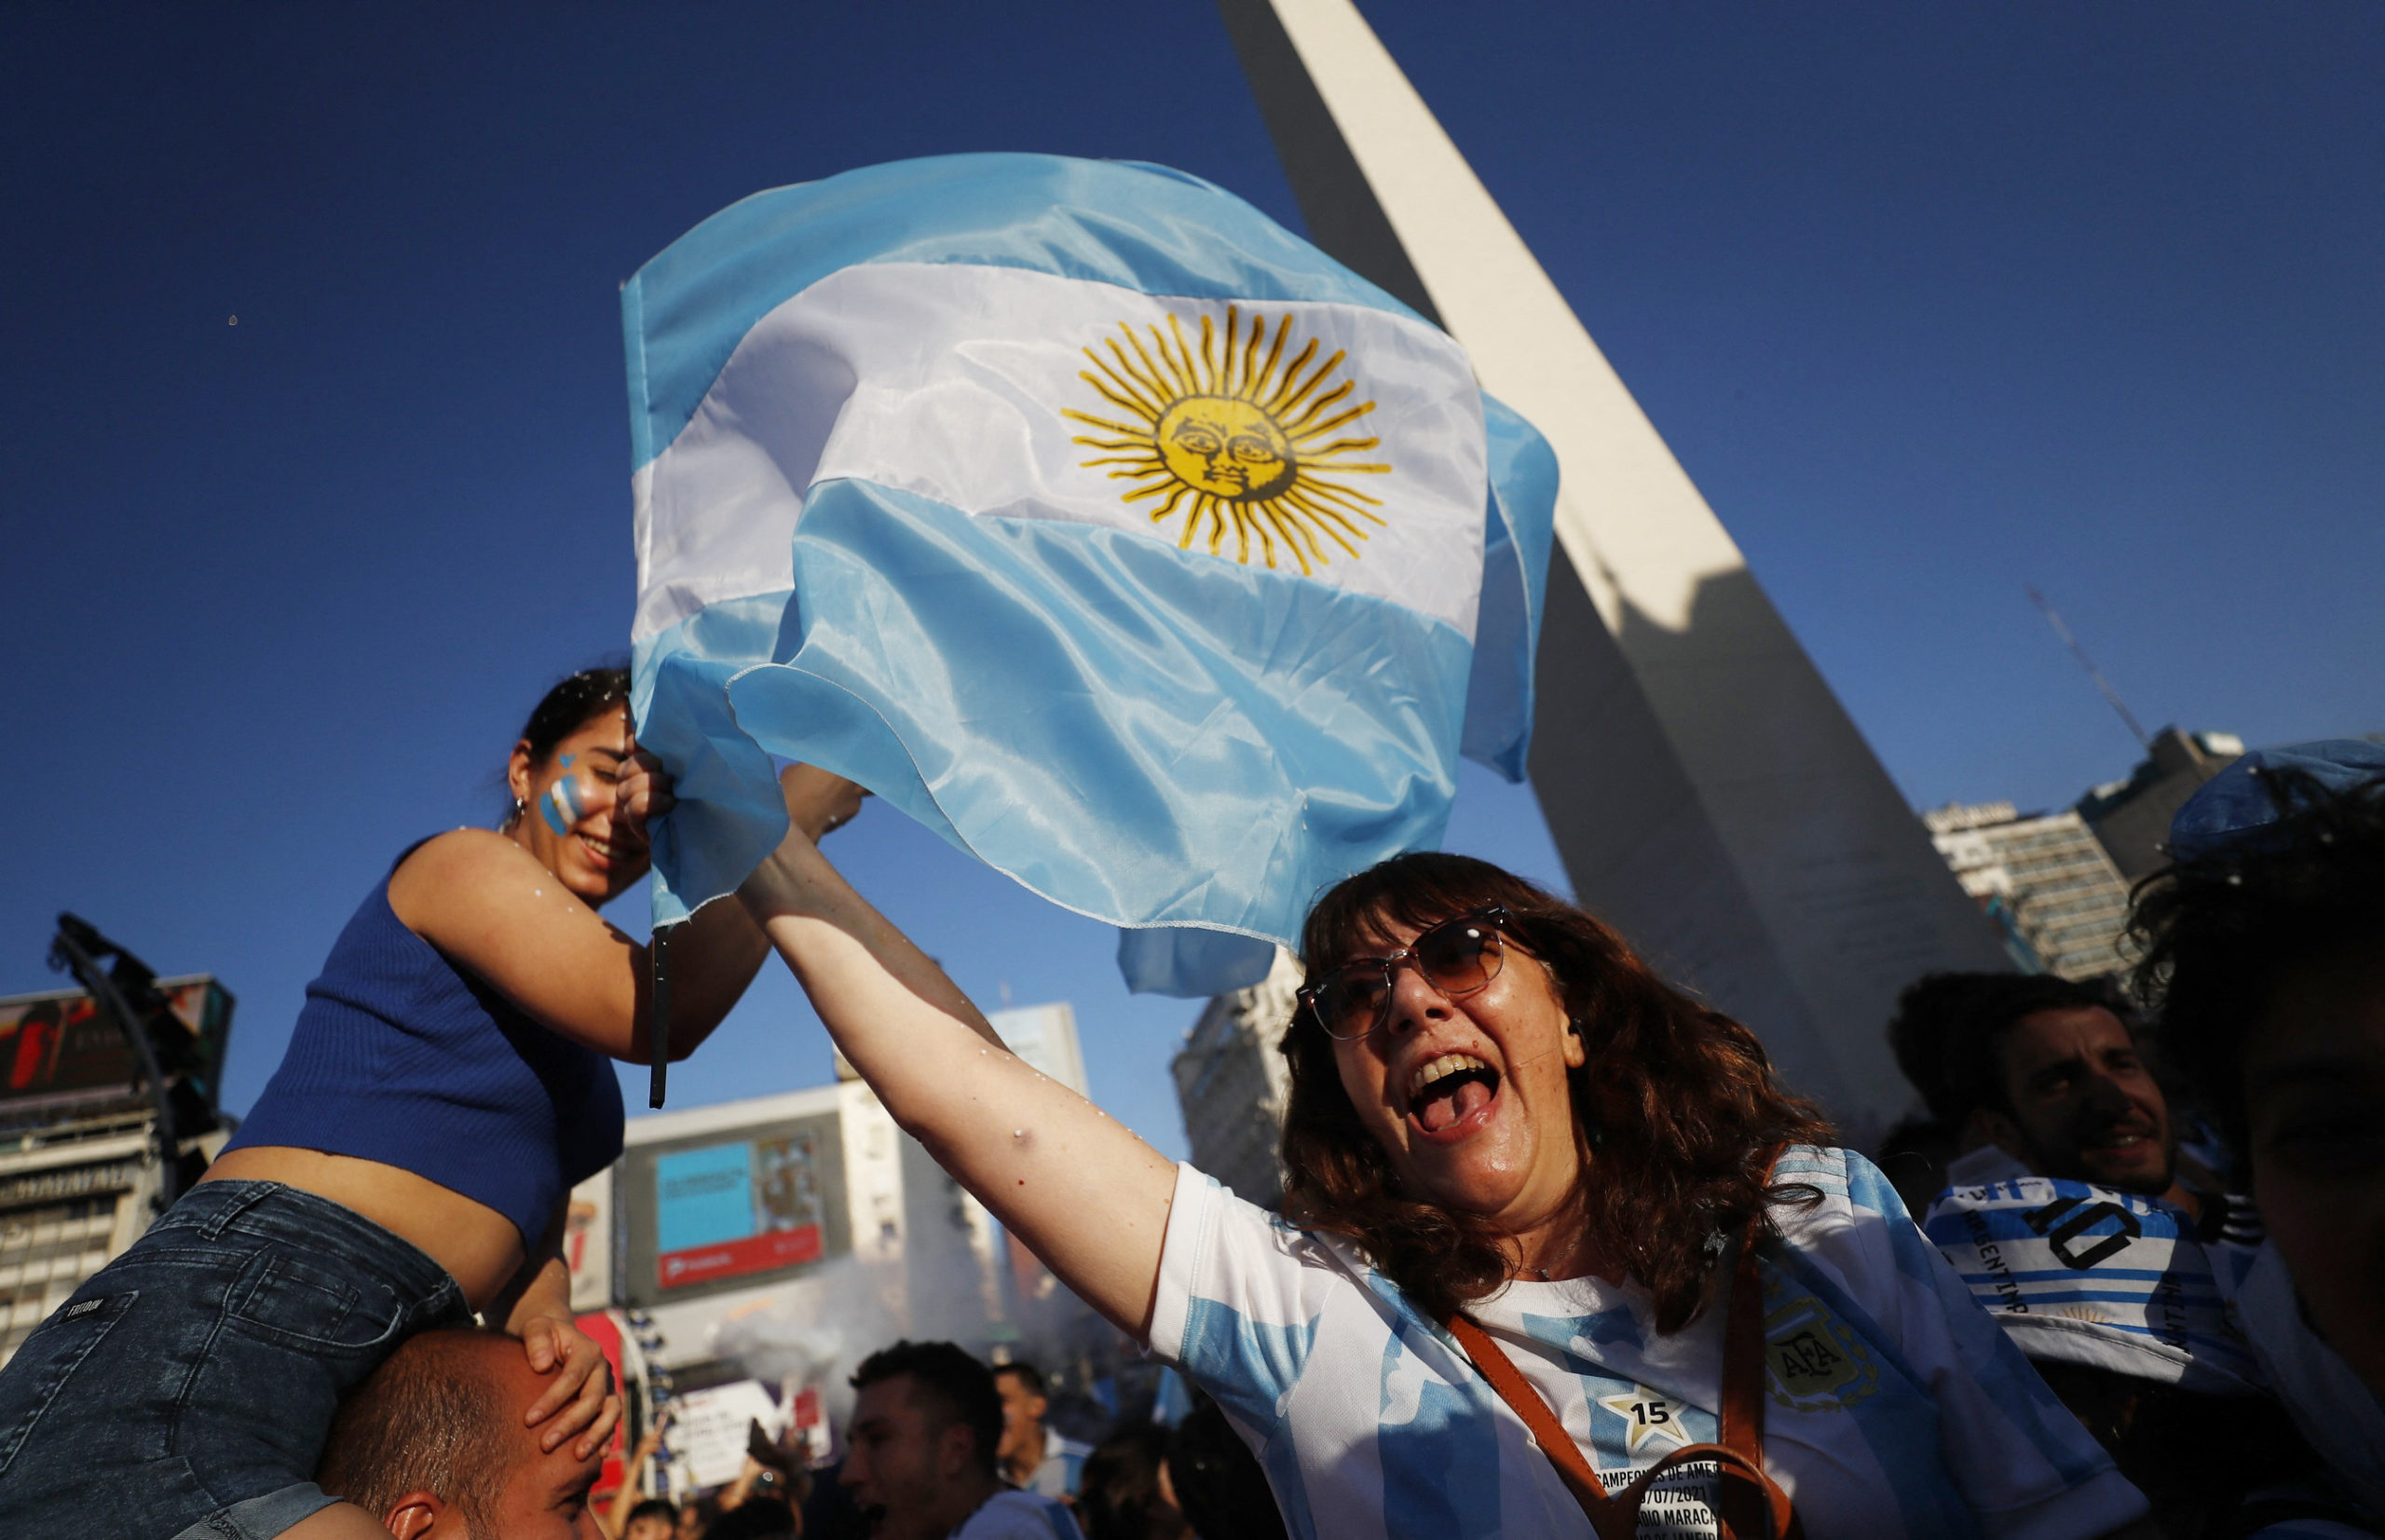 Soccer Football - FIFA World Cup Qatar 2022 - Fans in Buenos Aires watch Argentina v Croatia - Buenos Aires, Argentina - December 13, 2022 Argentina fans celebrate after the match as Argentina progress to the final 